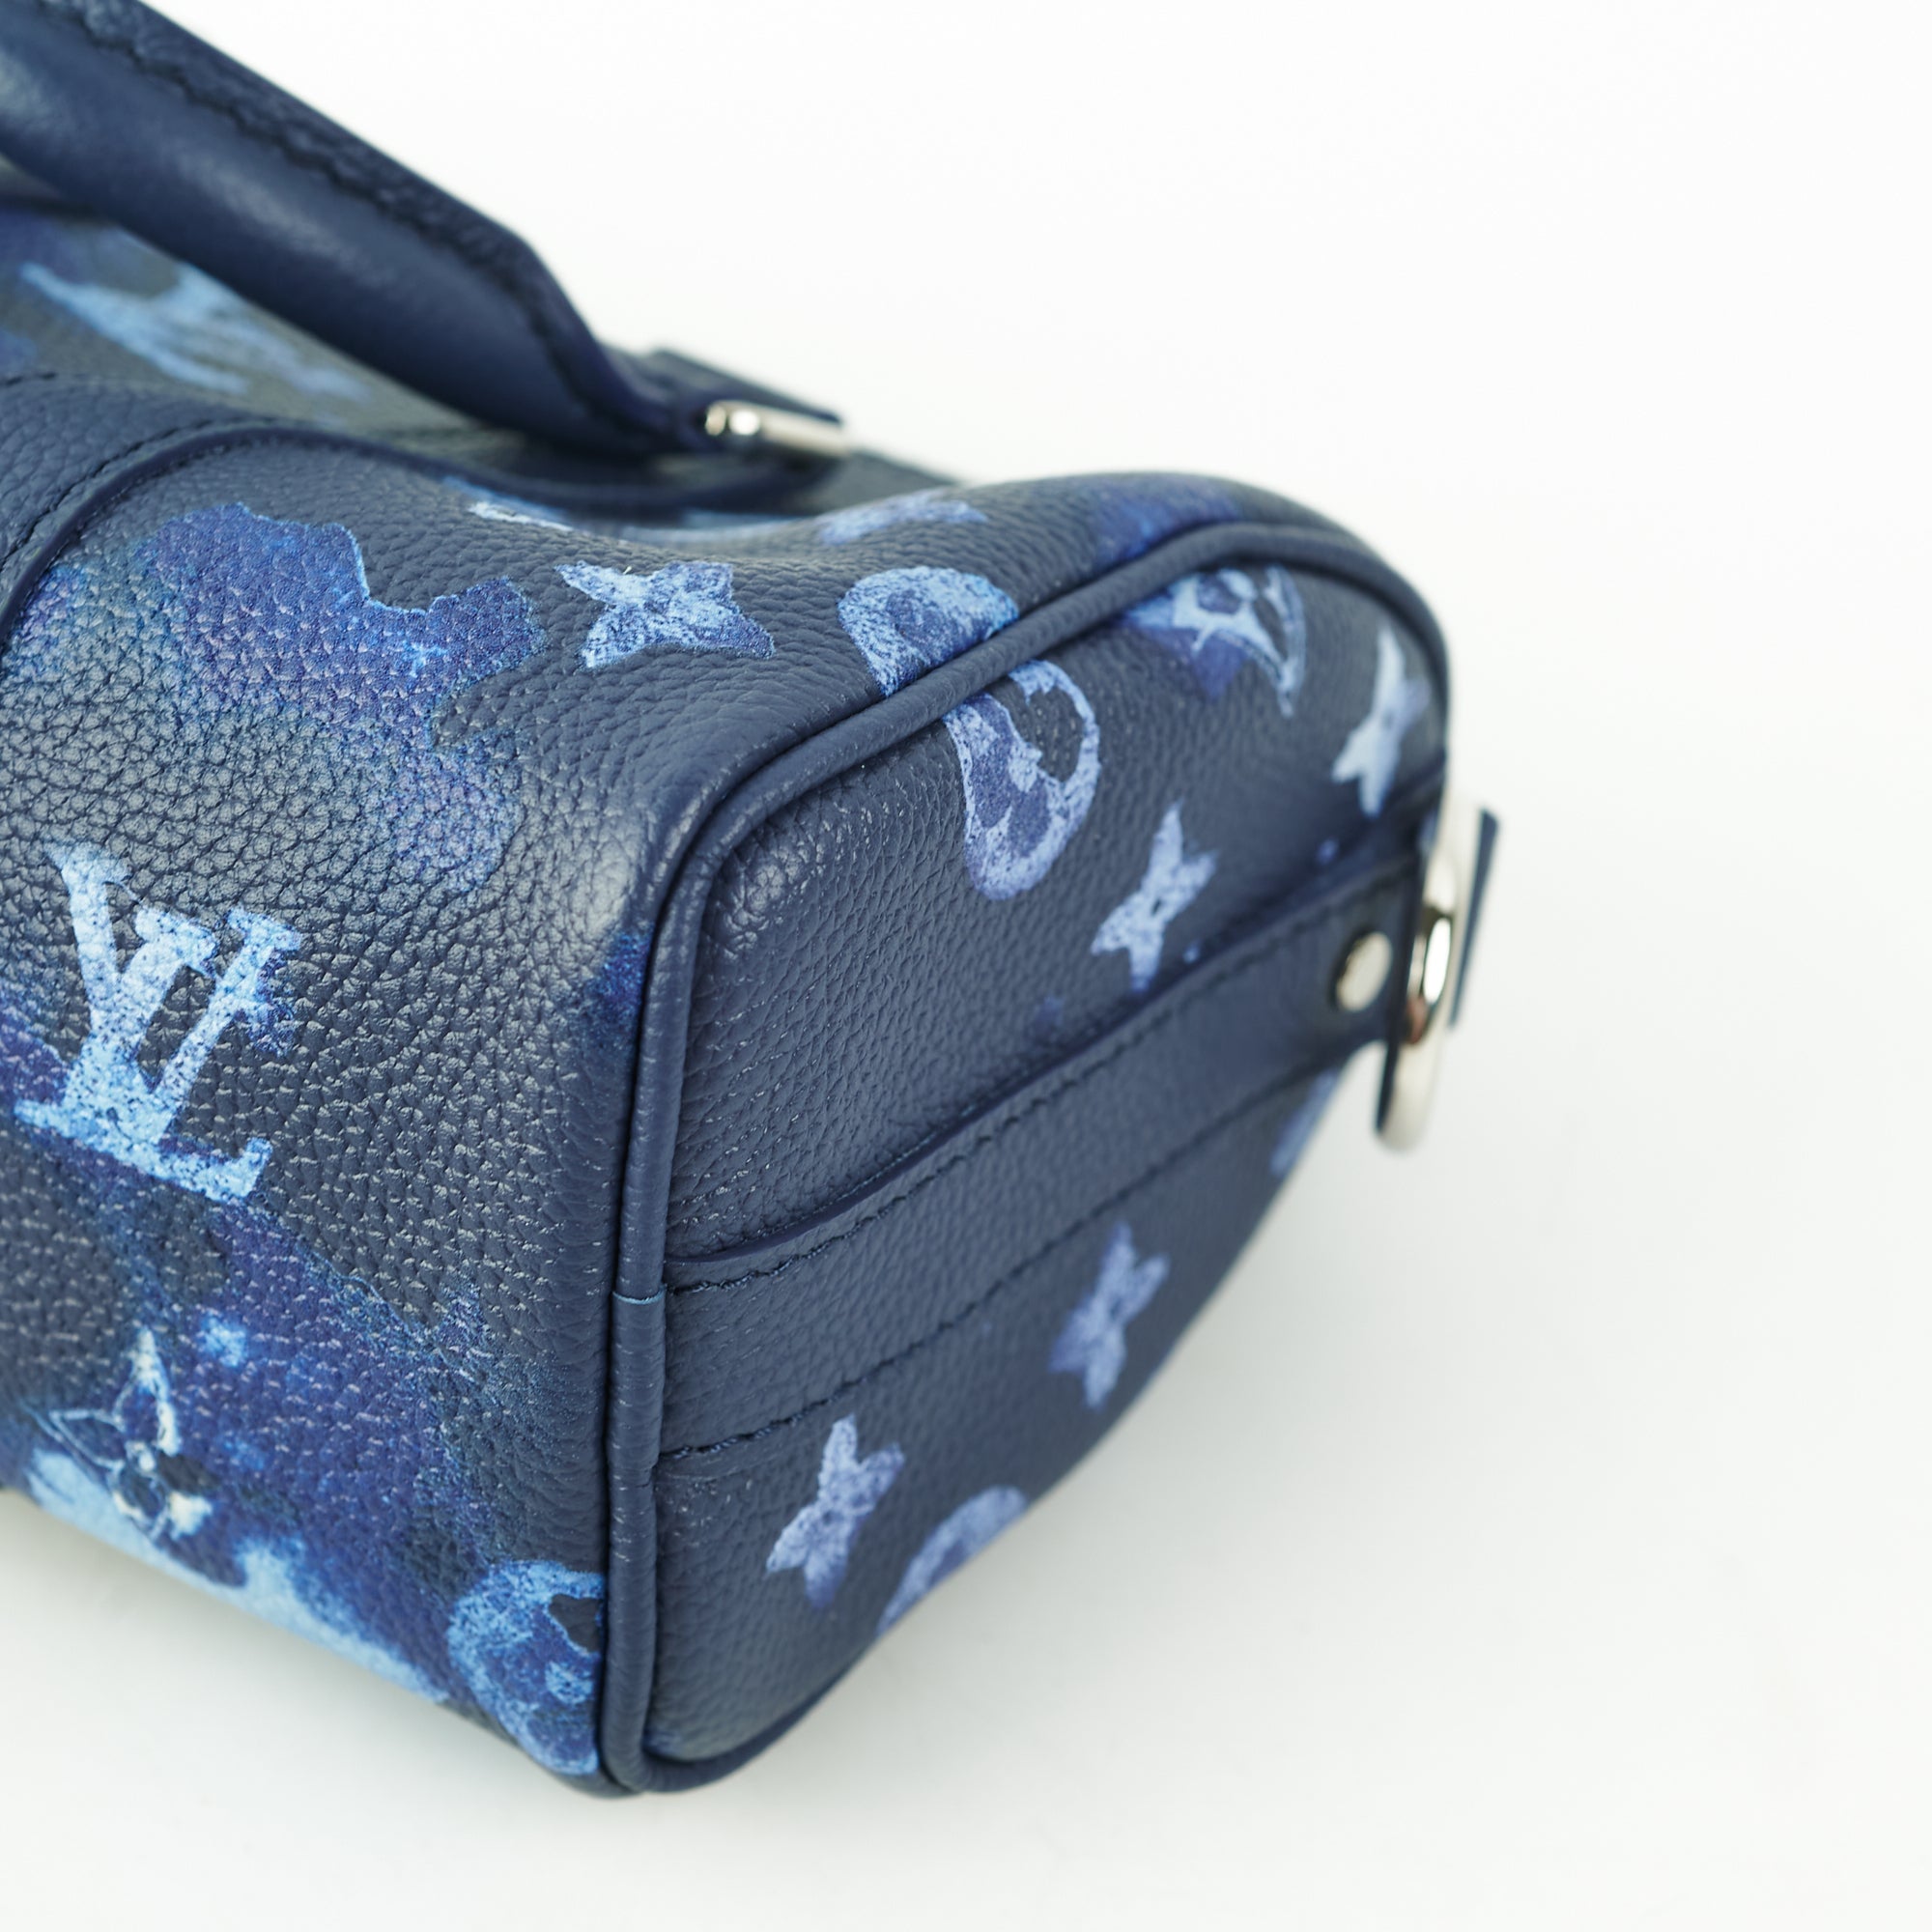 Louis Vuitton Keepall XS Monogram Limited Edition - ADC1140